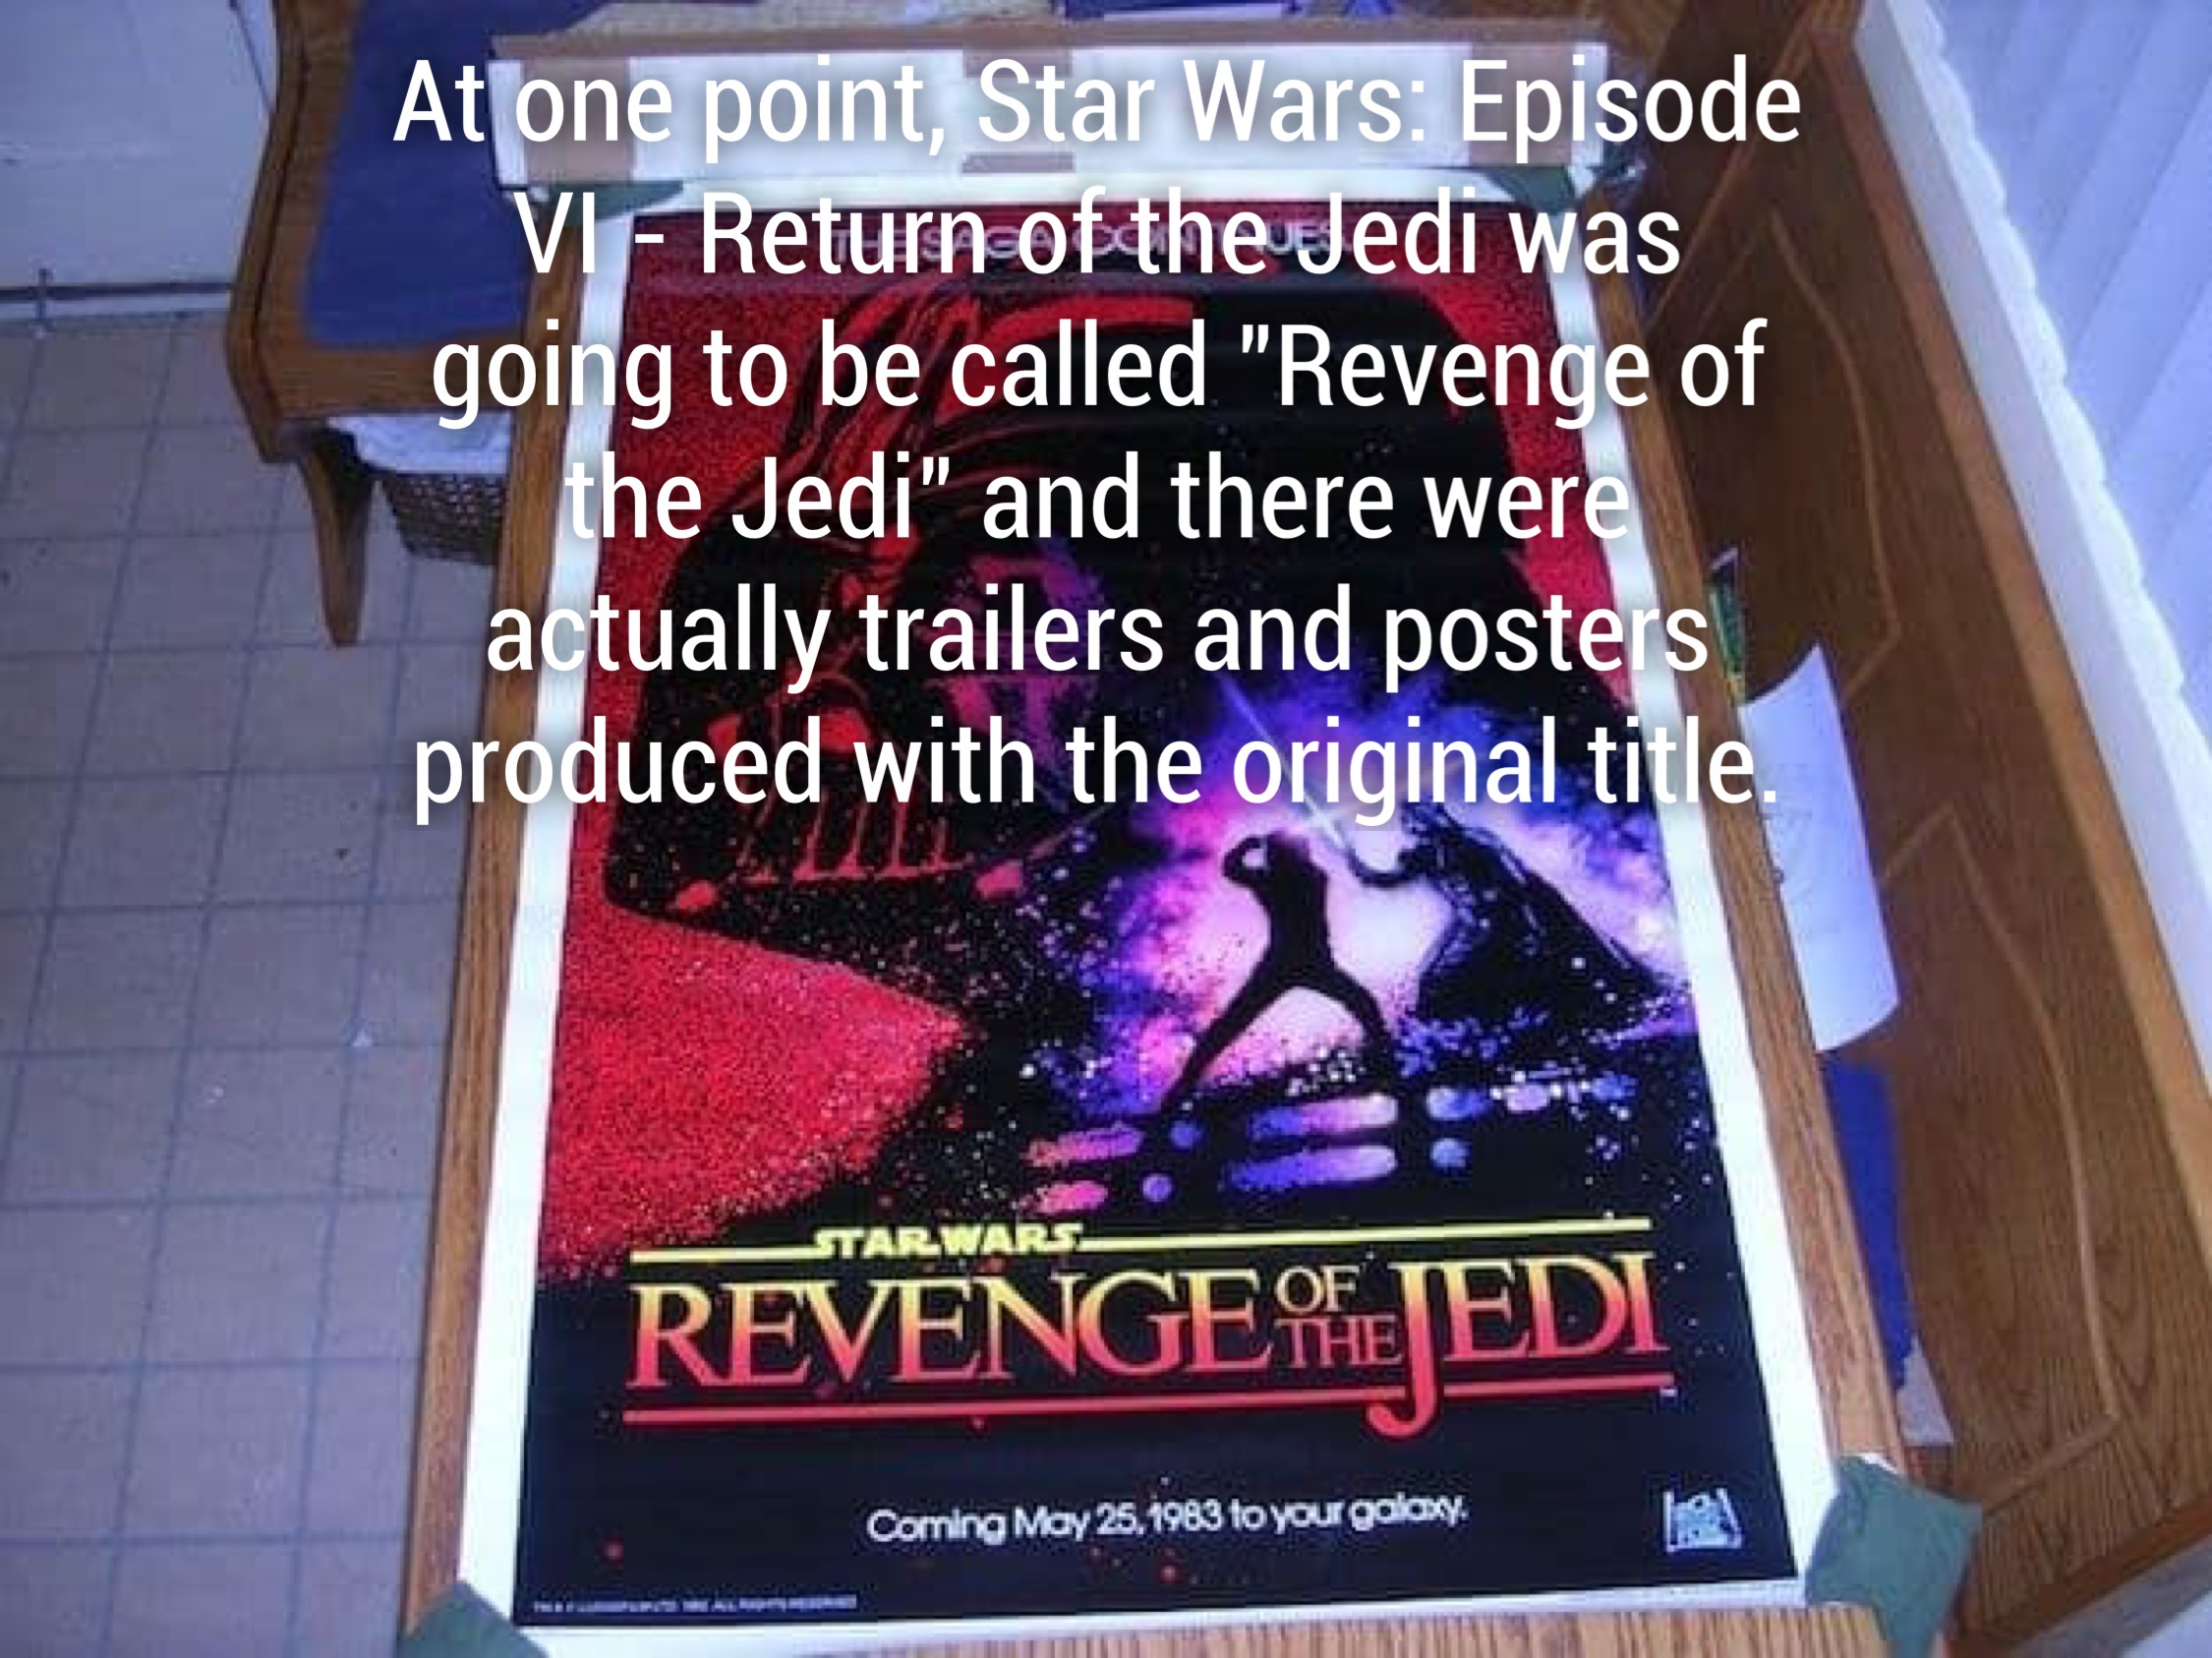 At one point, Star Wars Episode Vi Return of the Jedi was going to be called "Revenge of the Jedi" and there were actually trailers and posters produced with the original title Revenge Ojedi Corning May 25.1983 to your galony